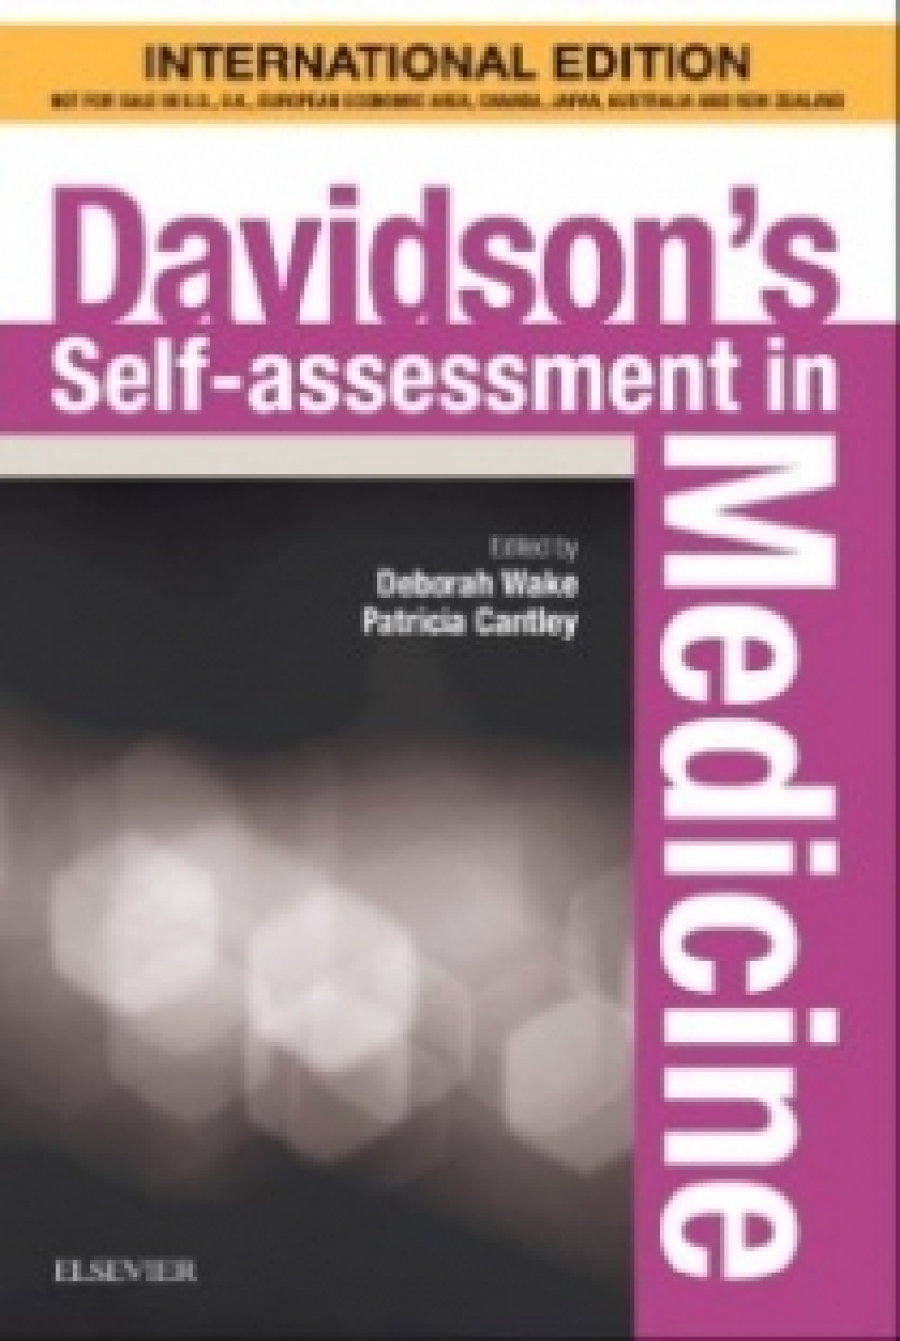 Wake D., Cantley P. Davidson's Self-assessment in Medicine, International Edition 